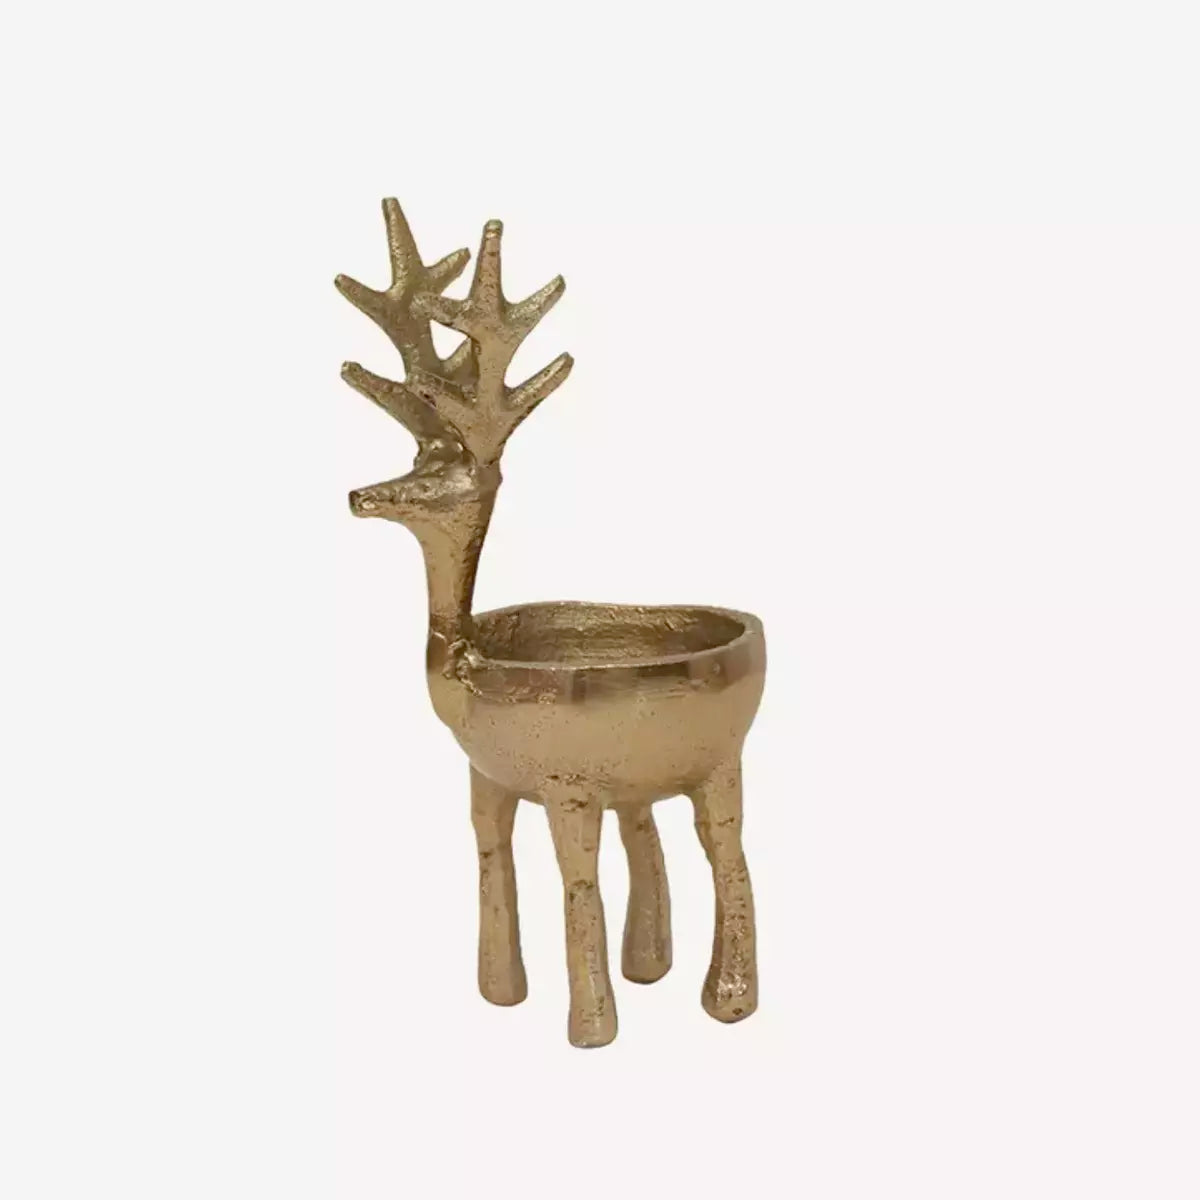 A Reindeer Sweets Bowl - Gold - Small from French Country Collections filled with Christmas treats on a white background.